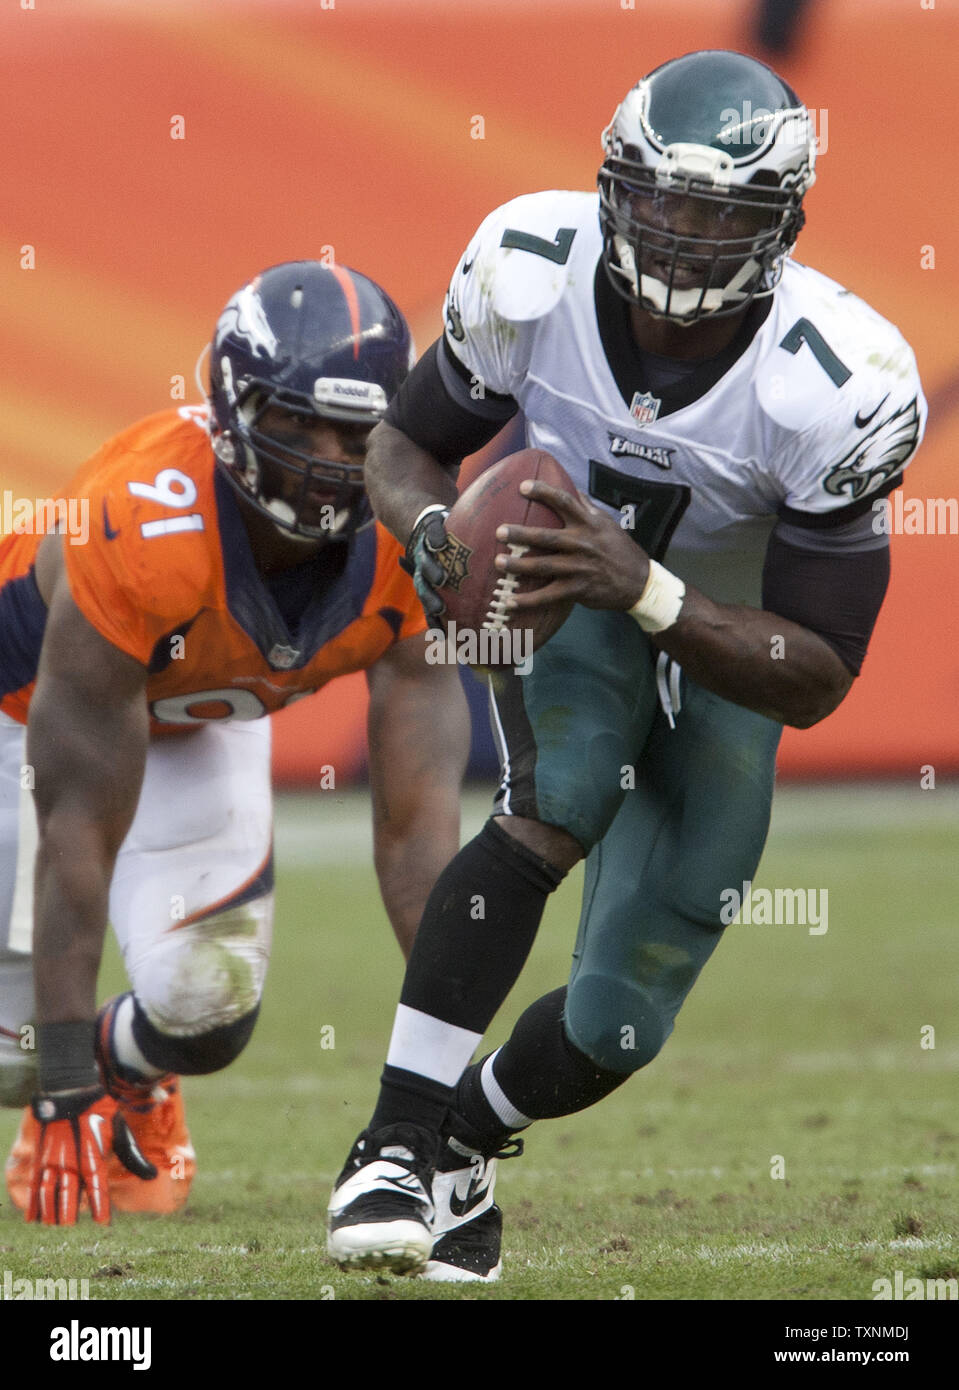 Denver Broncos Robert Ayers (91) chases Philadelphia Eagles quarterback Michael Vick out of the pocket during the third quarter at Sports Authority Field at Mile High in Denver on September 29, 2013.  Denver (4-0) beat Philadelphia (1-3) 52-20 to remain undefeated.     UPI/Gary C. Caskey Stock Photo